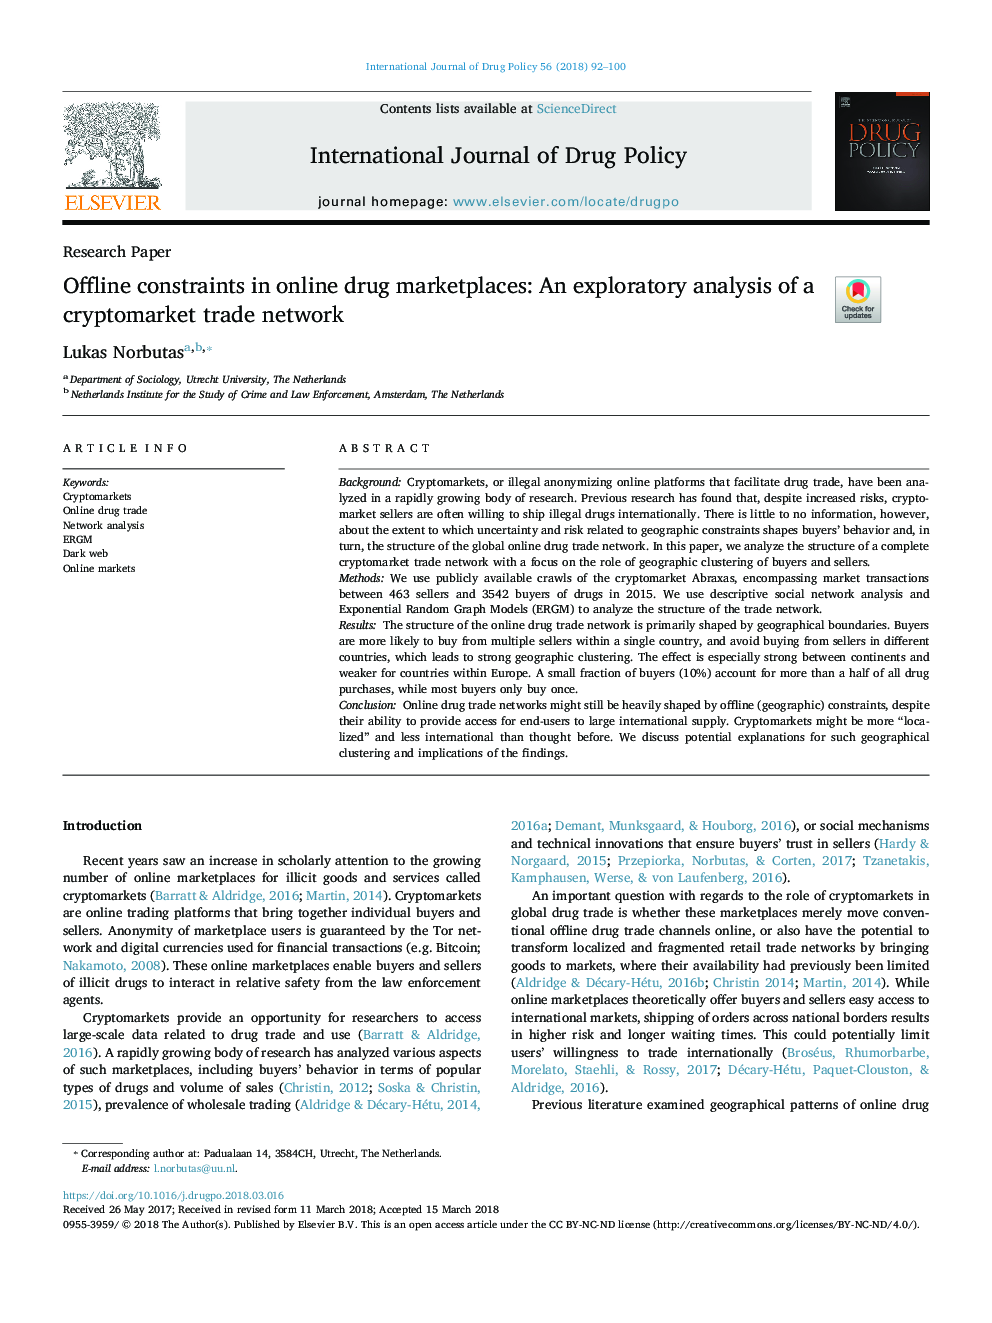 Offline constraints in online drug marketplaces: An exploratory analysis of a cryptomarket trade network